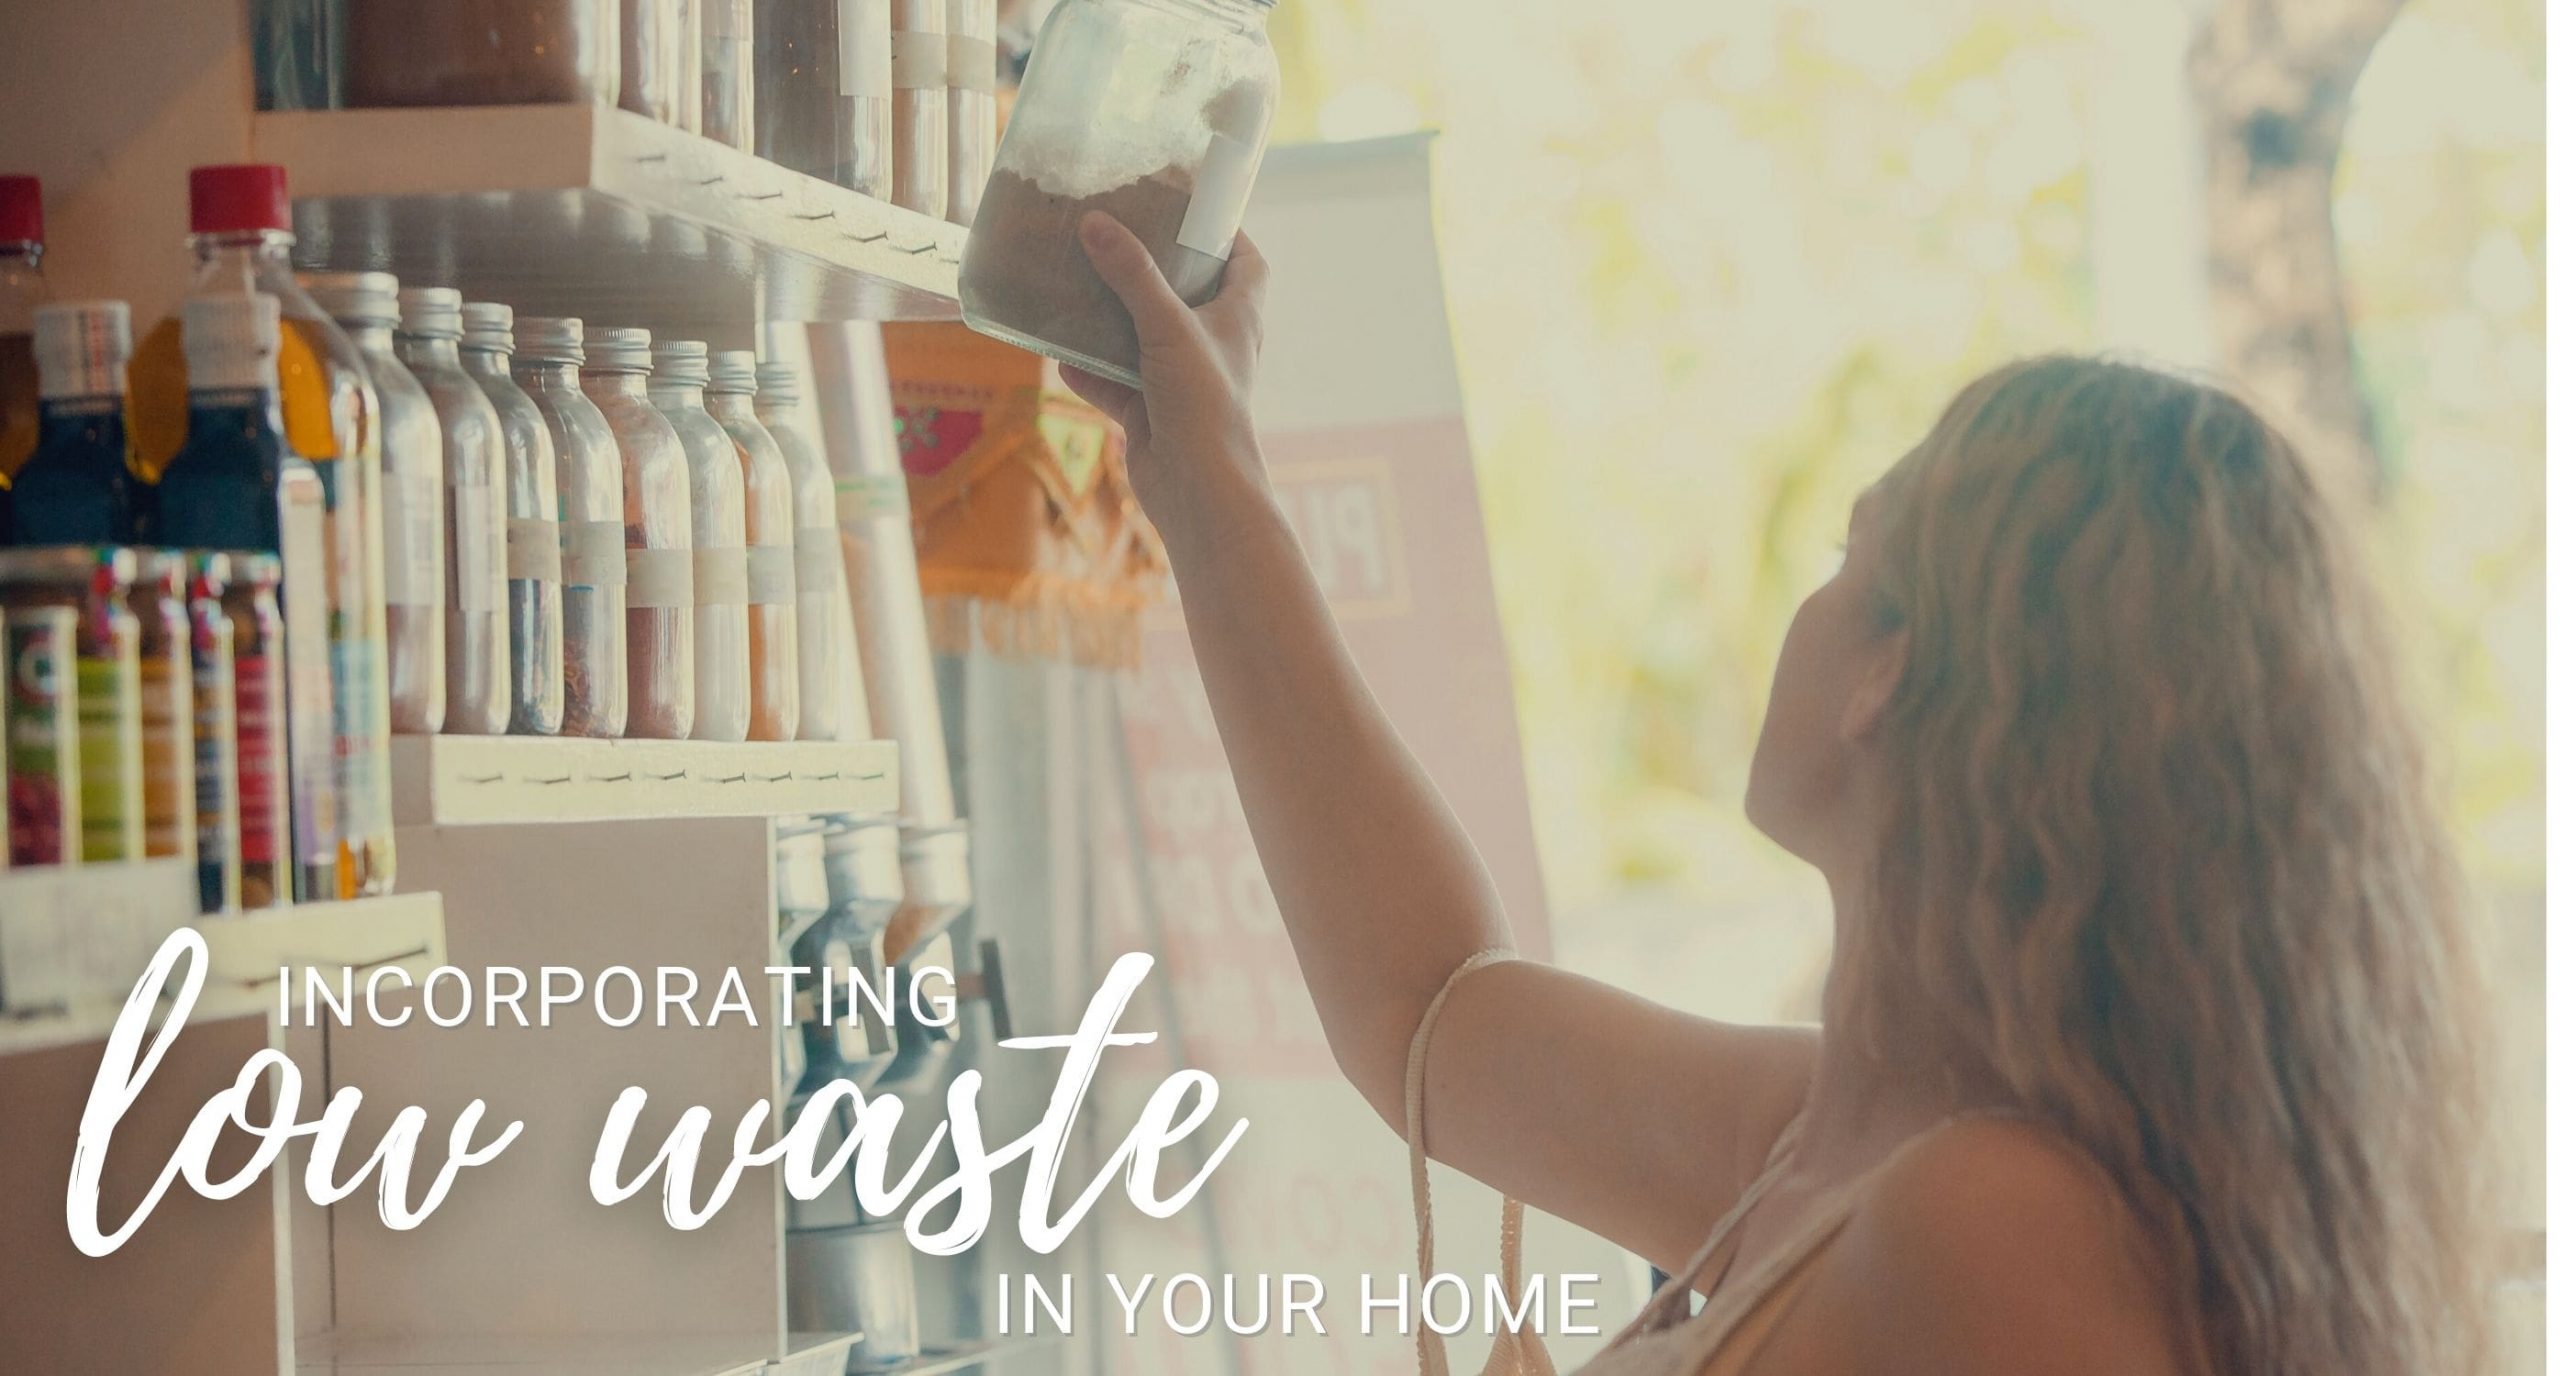 Low Waste at Home